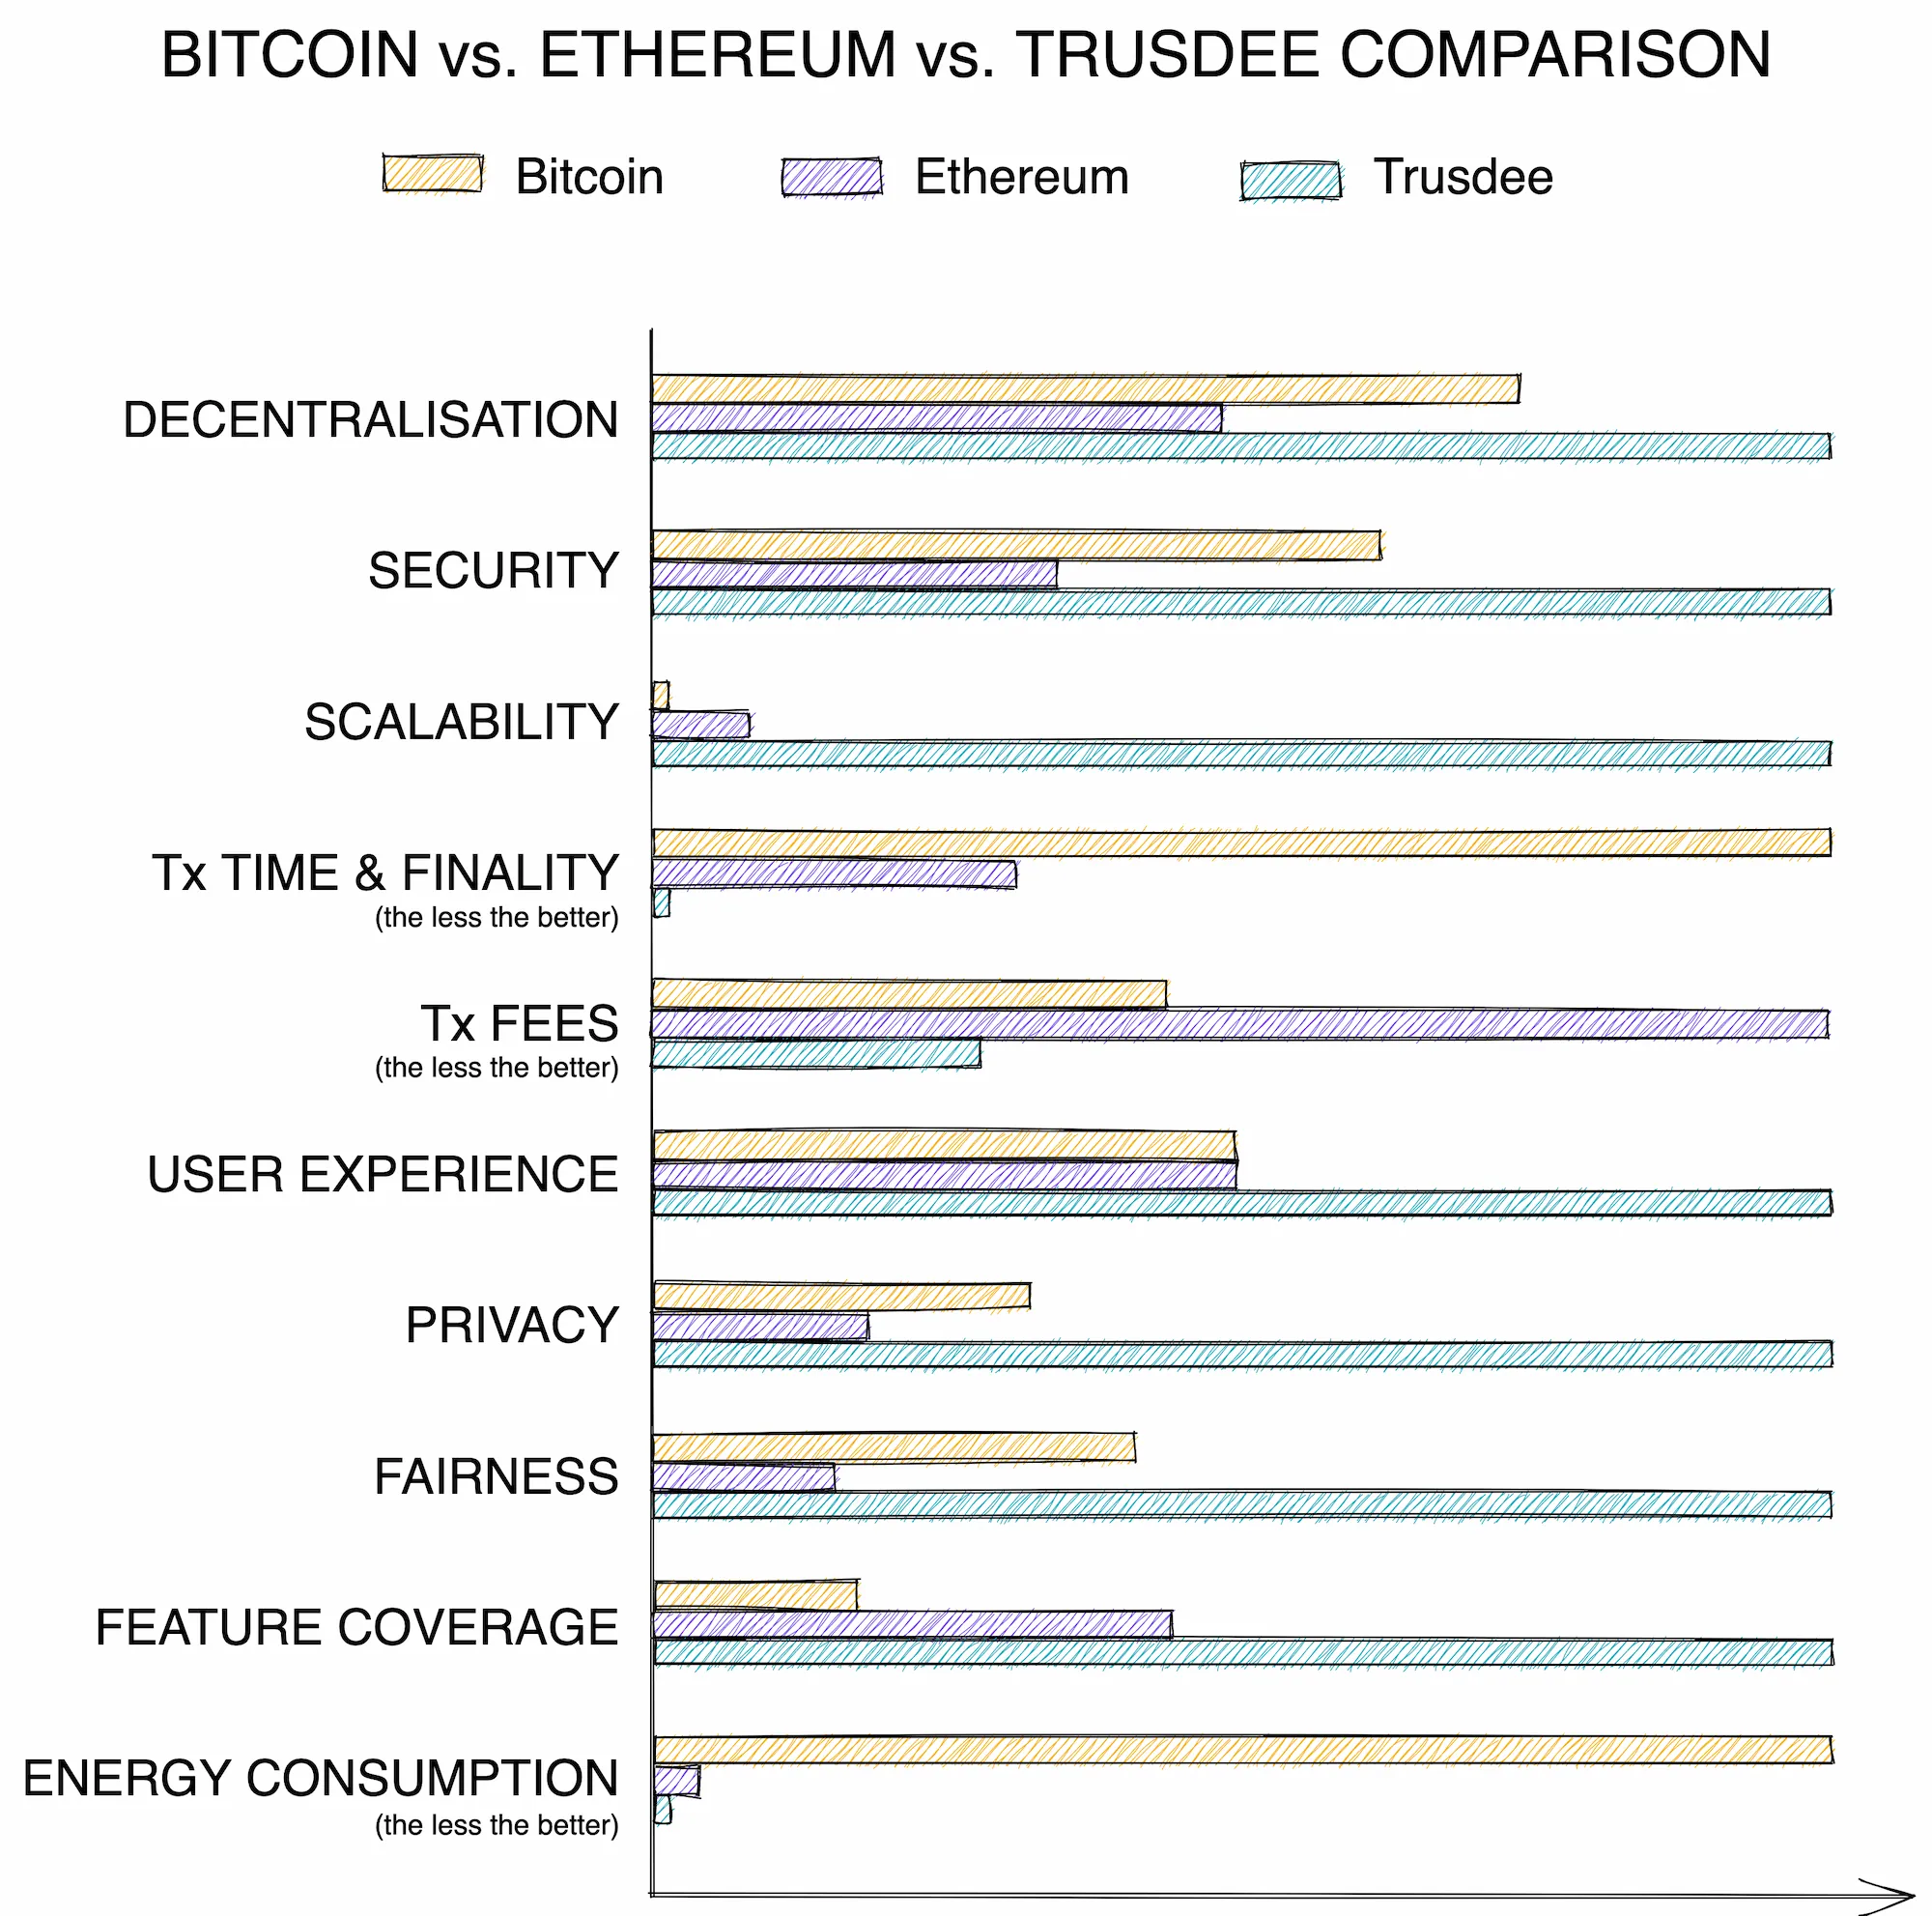 Bar chart comparison between Bitcoin, Ethereum and Trusdee showing the real potential of Trusdee